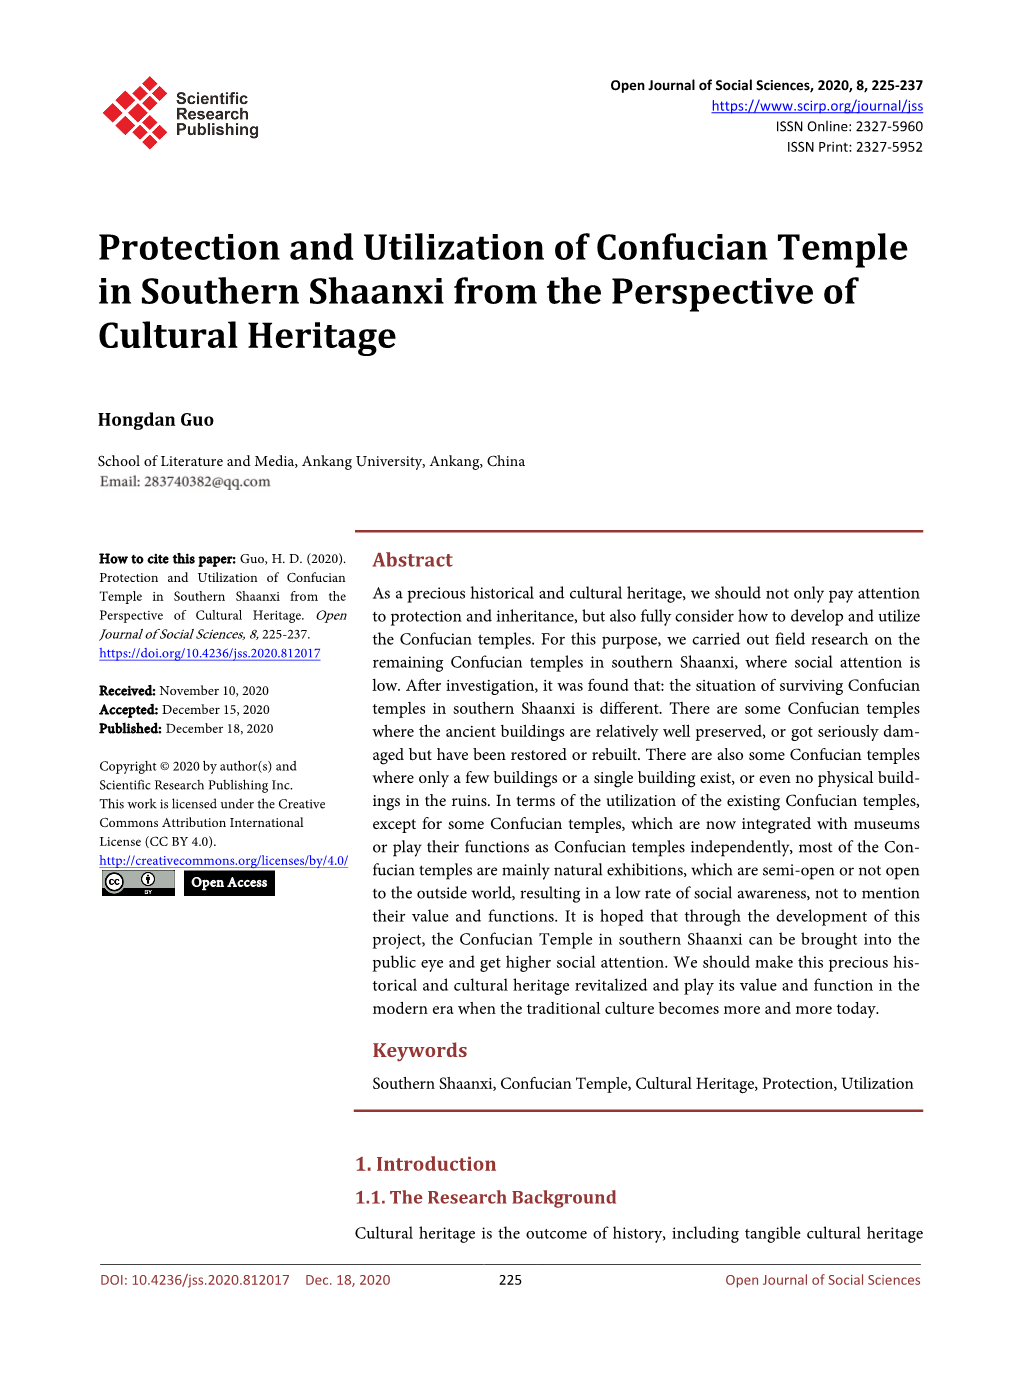 Protection and Utilization of Confucian Temple in Southern Shaanxi from the Perspective of Cultural Heritage